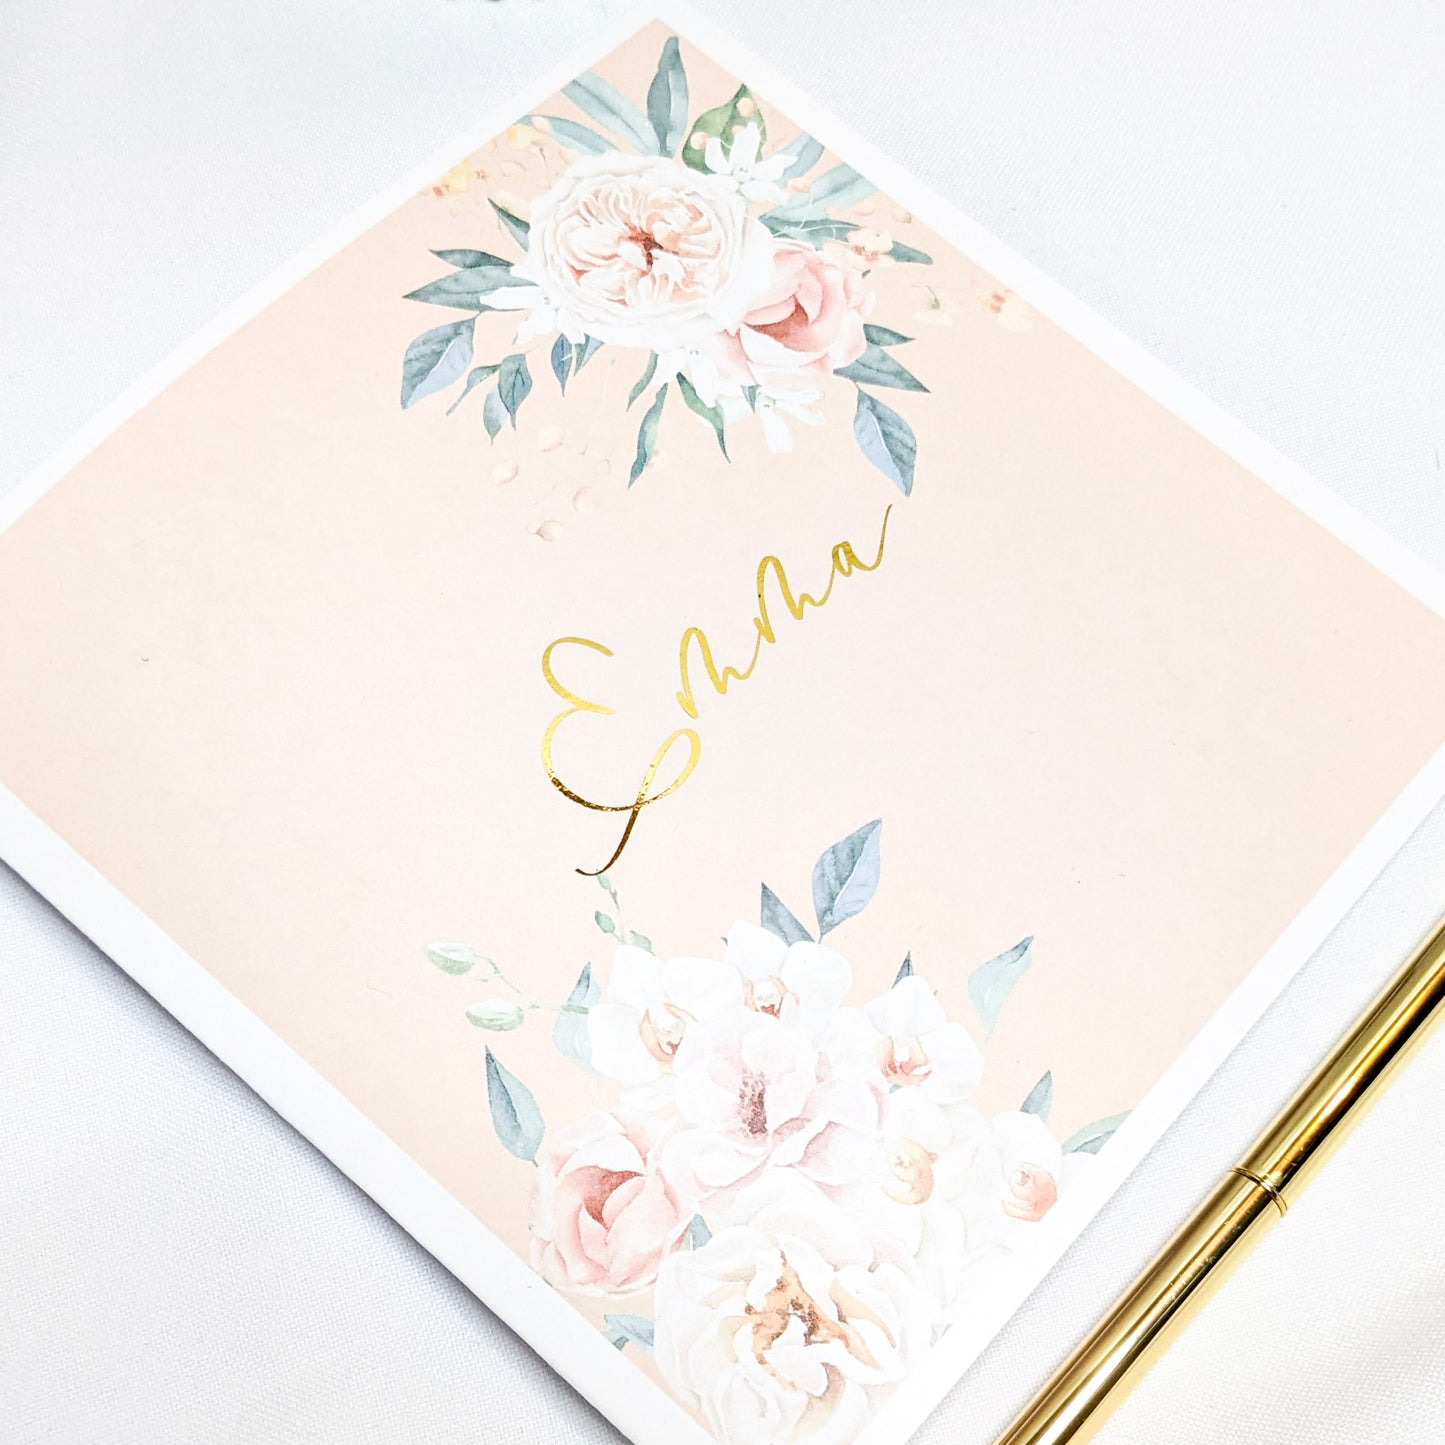 Personalised Memory & Notebook Gift Set | Peach Floral